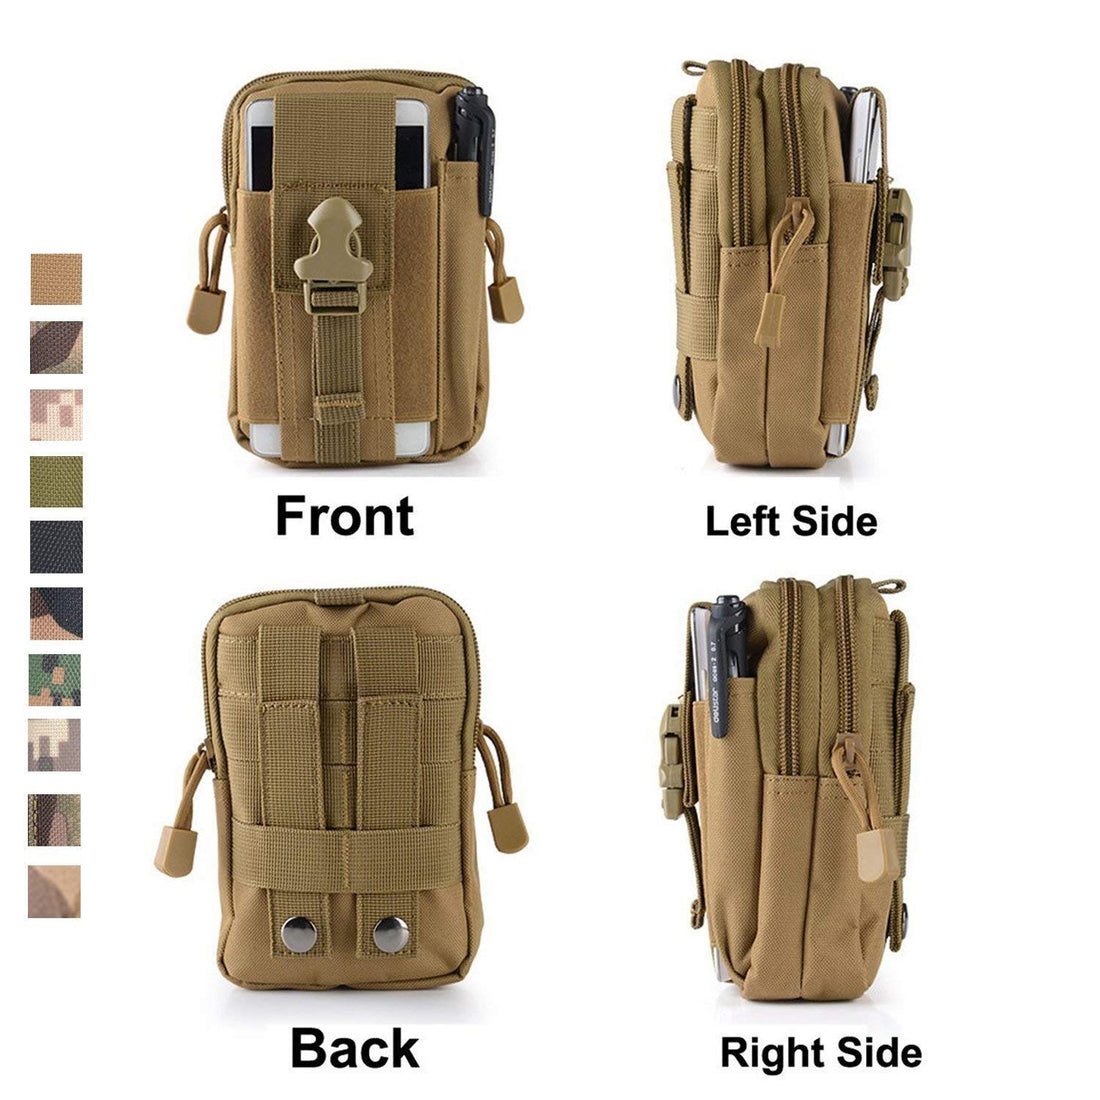 IronSeals Tactical Molle Pouch Multi-Purpose Compact Utility Pouch Waist  Belt Phone Holster for iPho…See more IronSeals Tactical Molle Pouch